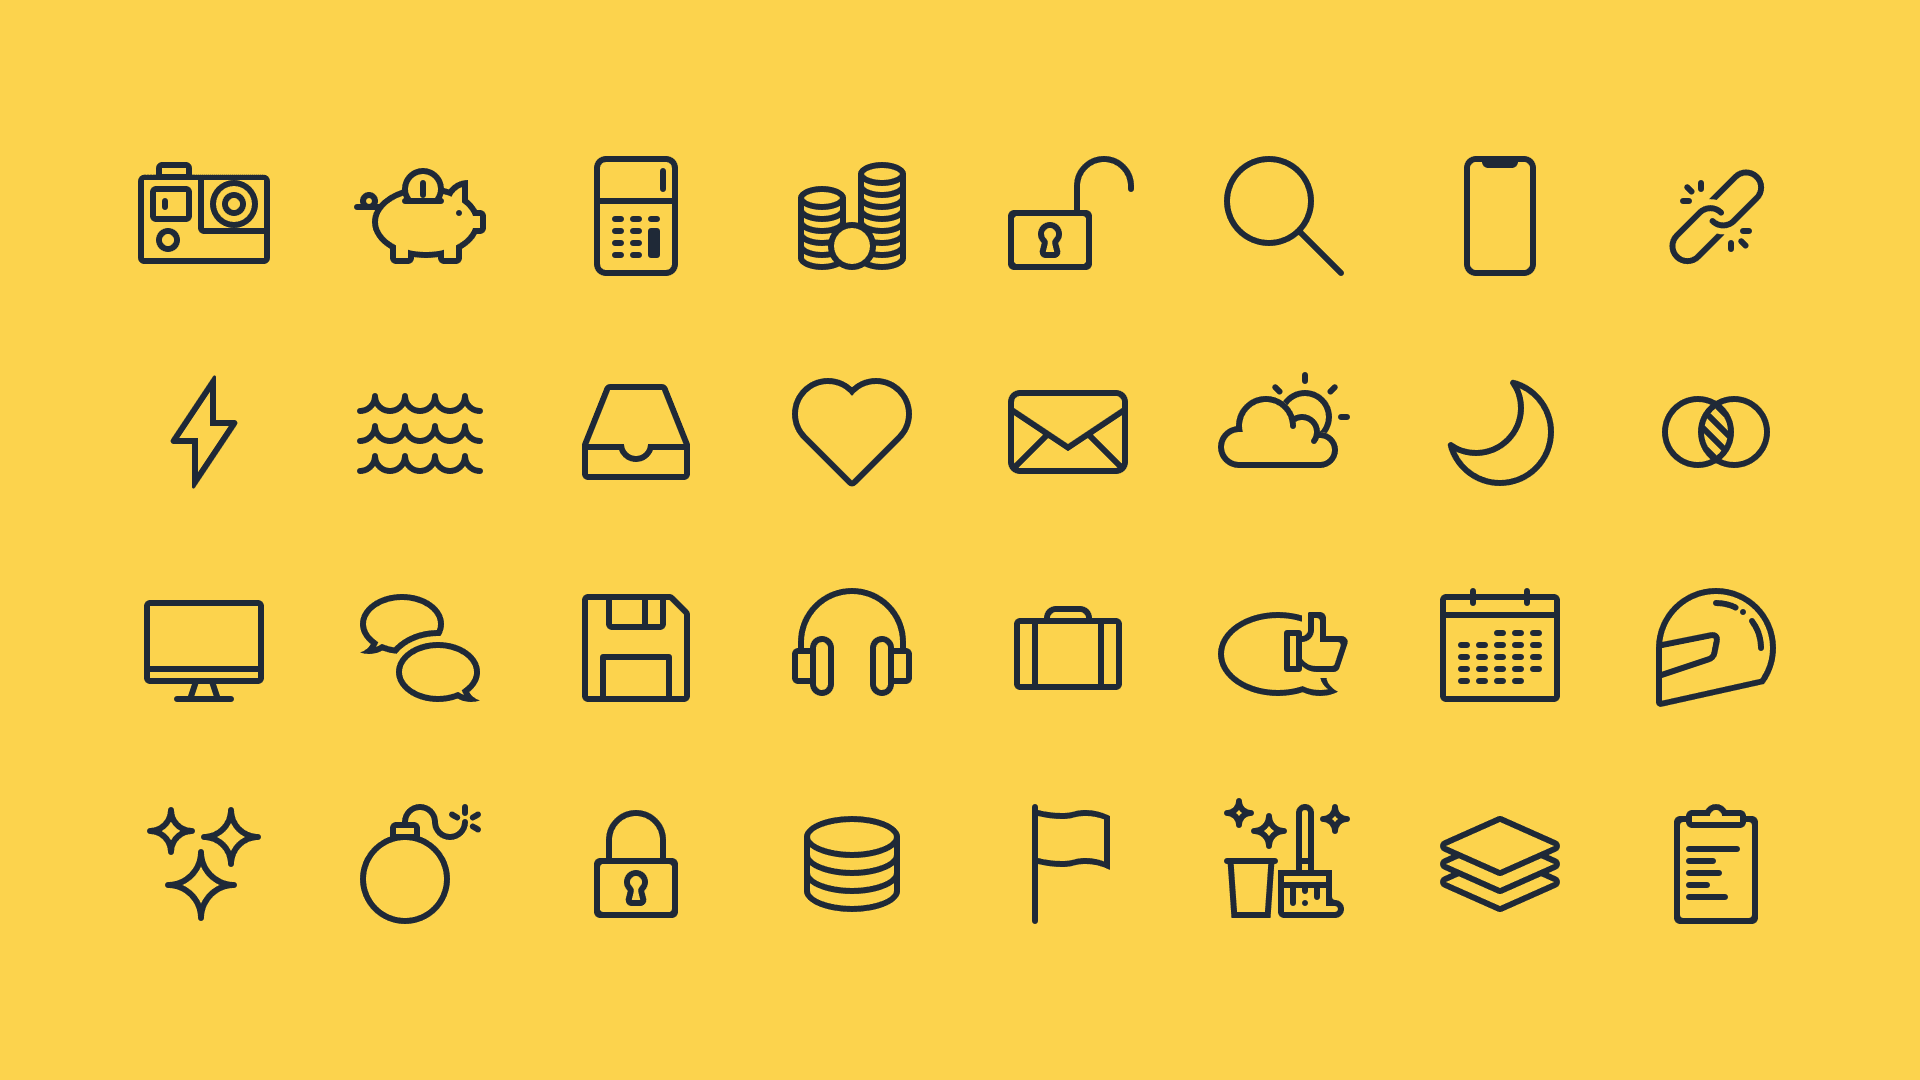 A preview of some icons included in the set.